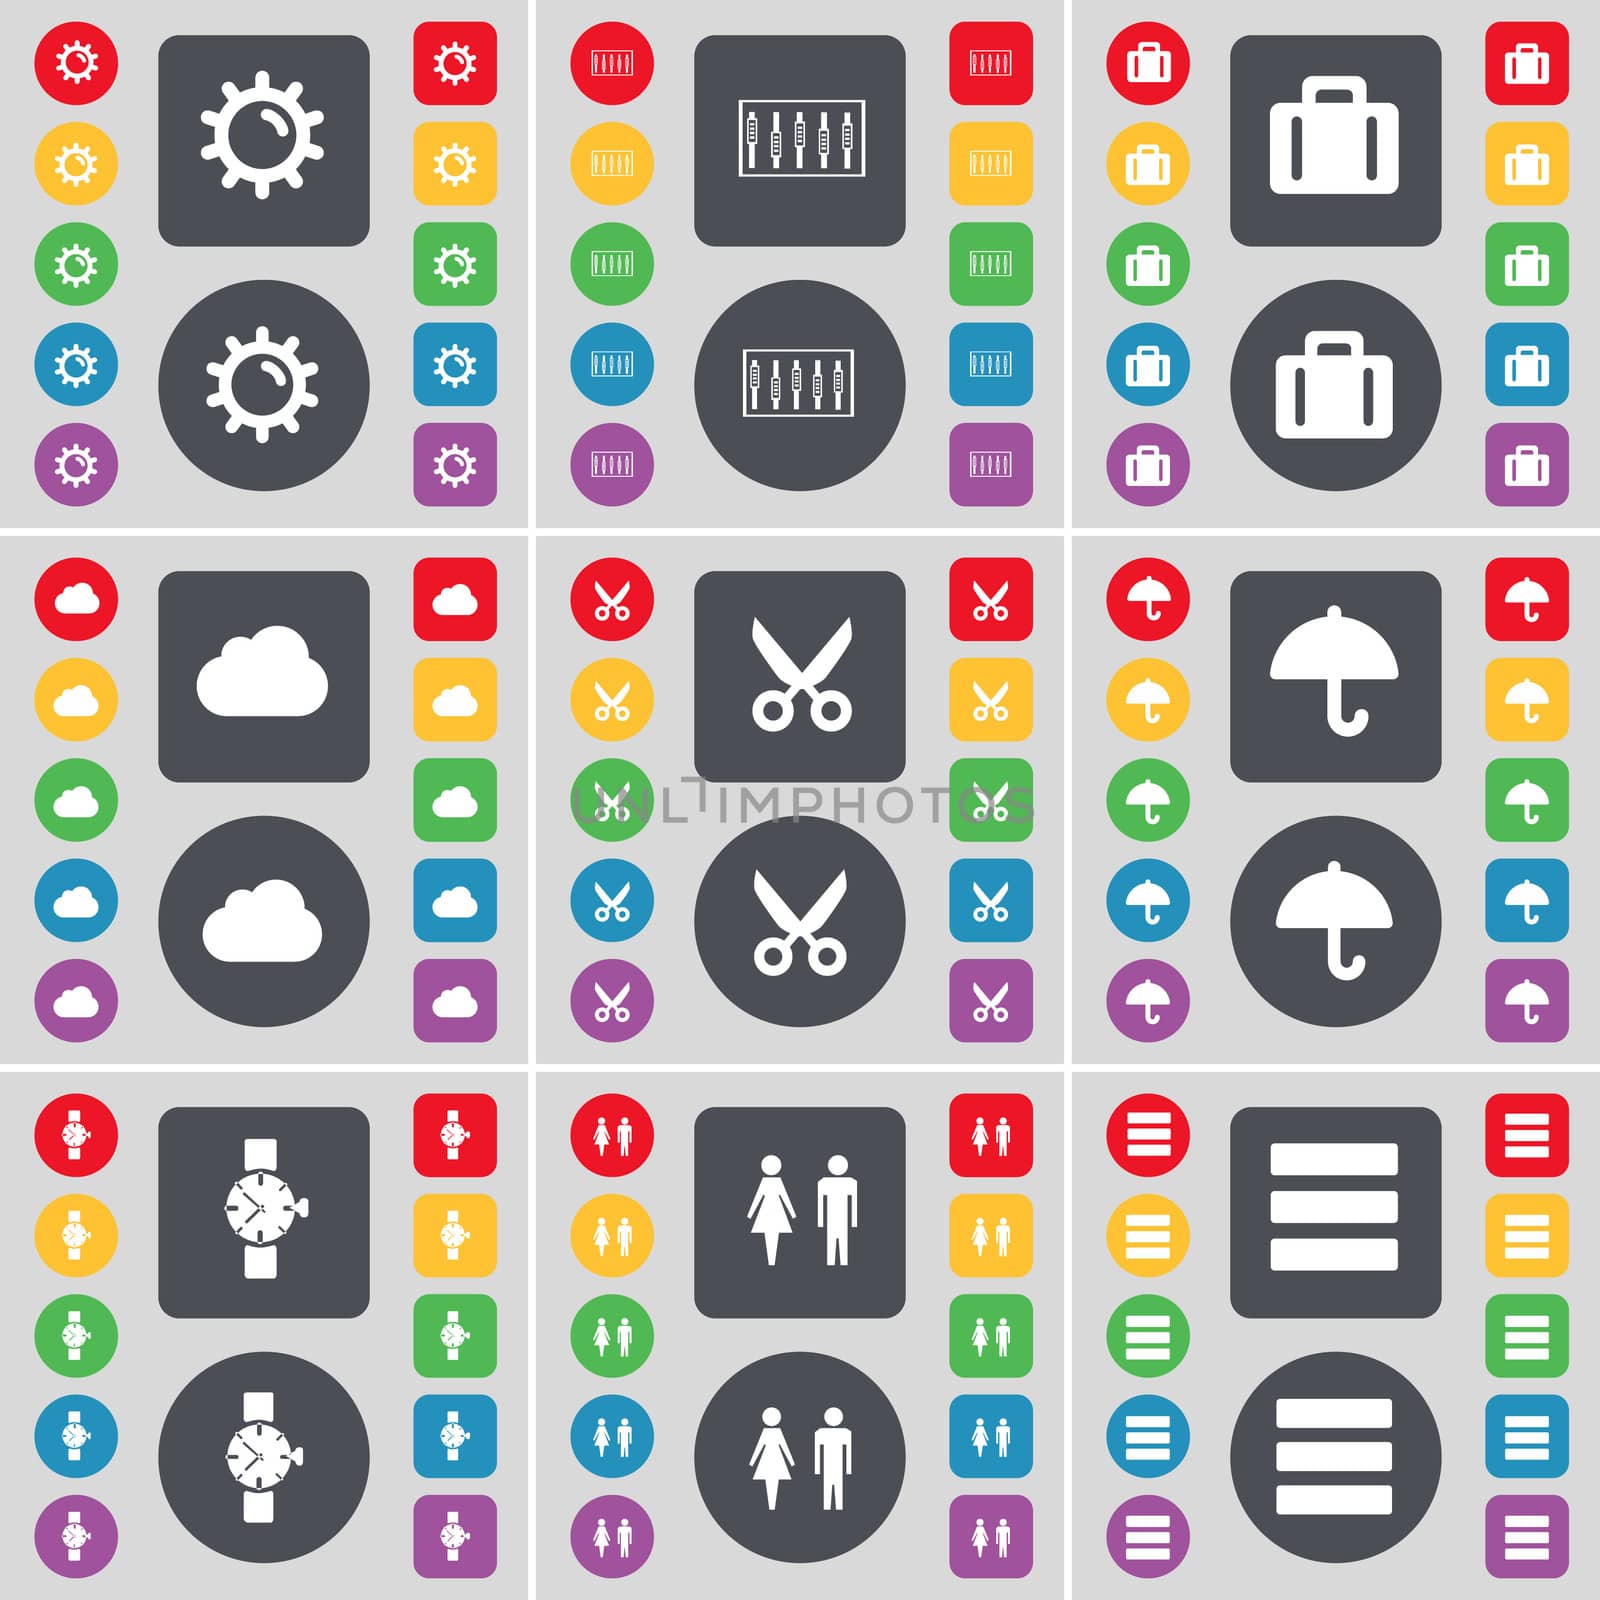 Gear, Equalizer, Suitcase, Cloud, Scissors, Umbrella, Wrist watch, Silhouette, Apps icon symbol. A large set of flat, colored buttons for your design. illustration